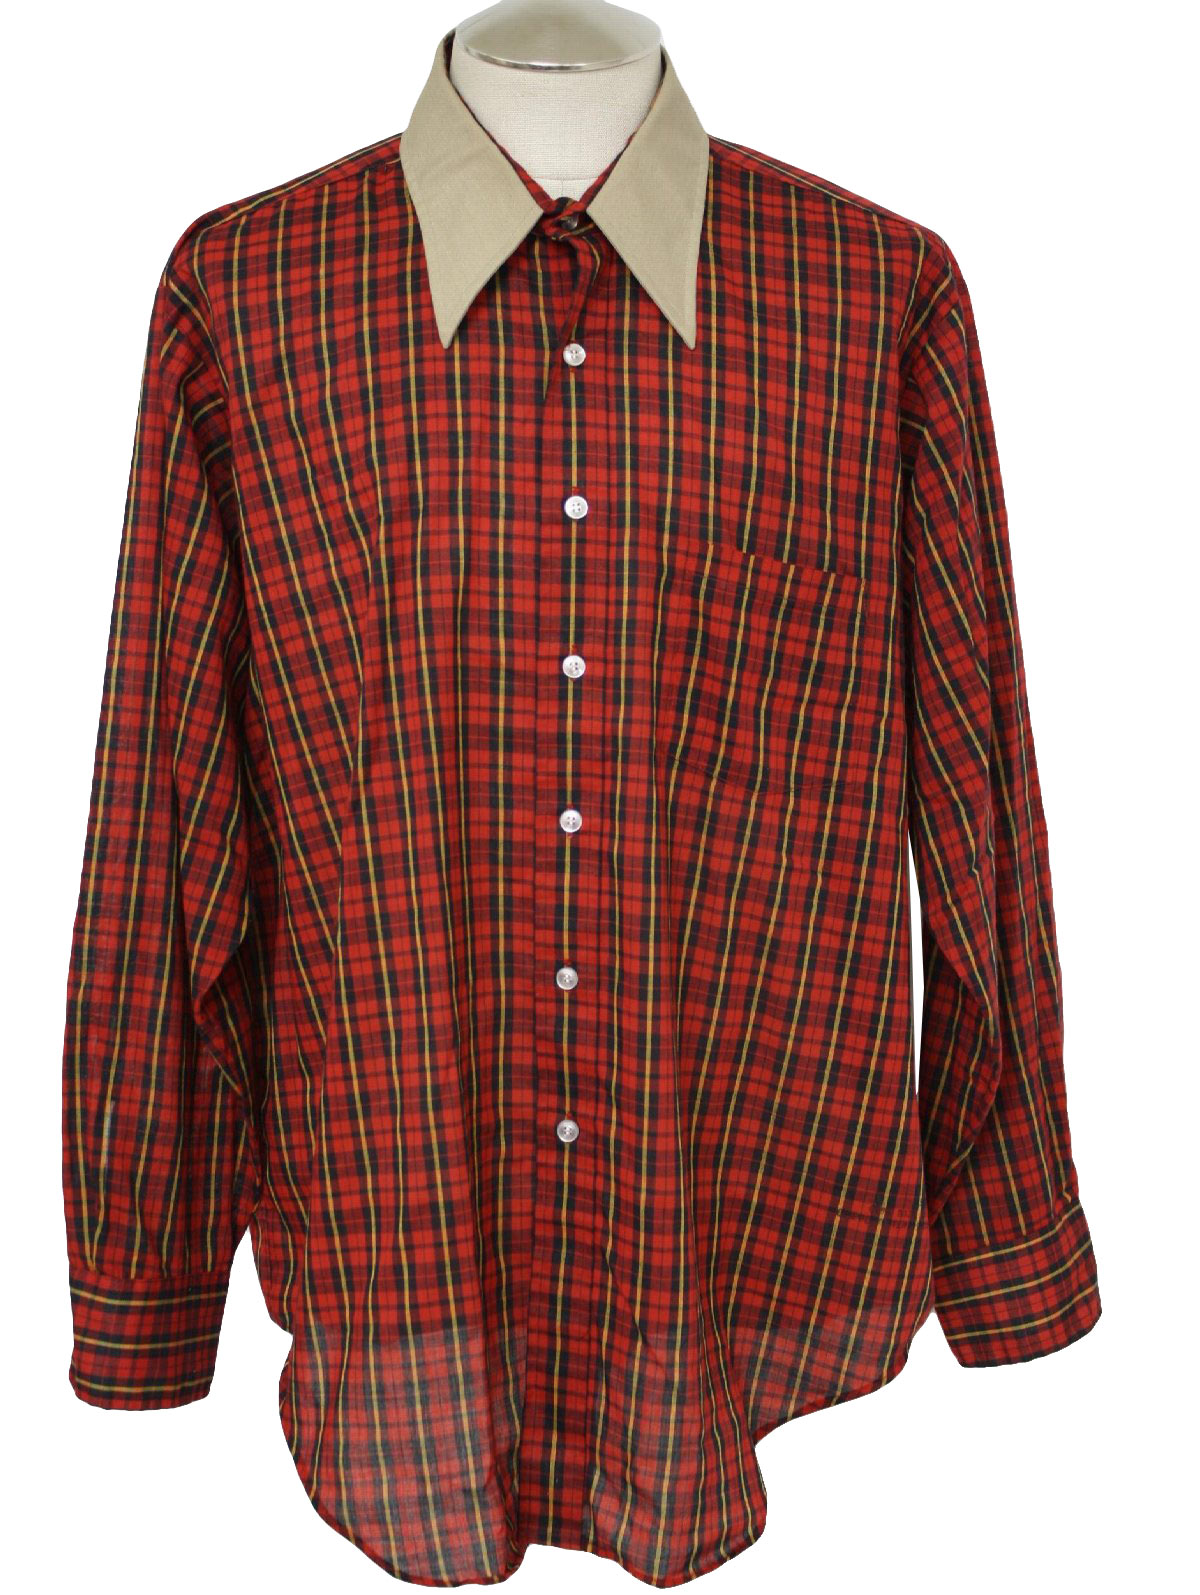 1970s Haband Shirt: 70s -Haband- Mens red, black, yellow and tan cotton ...